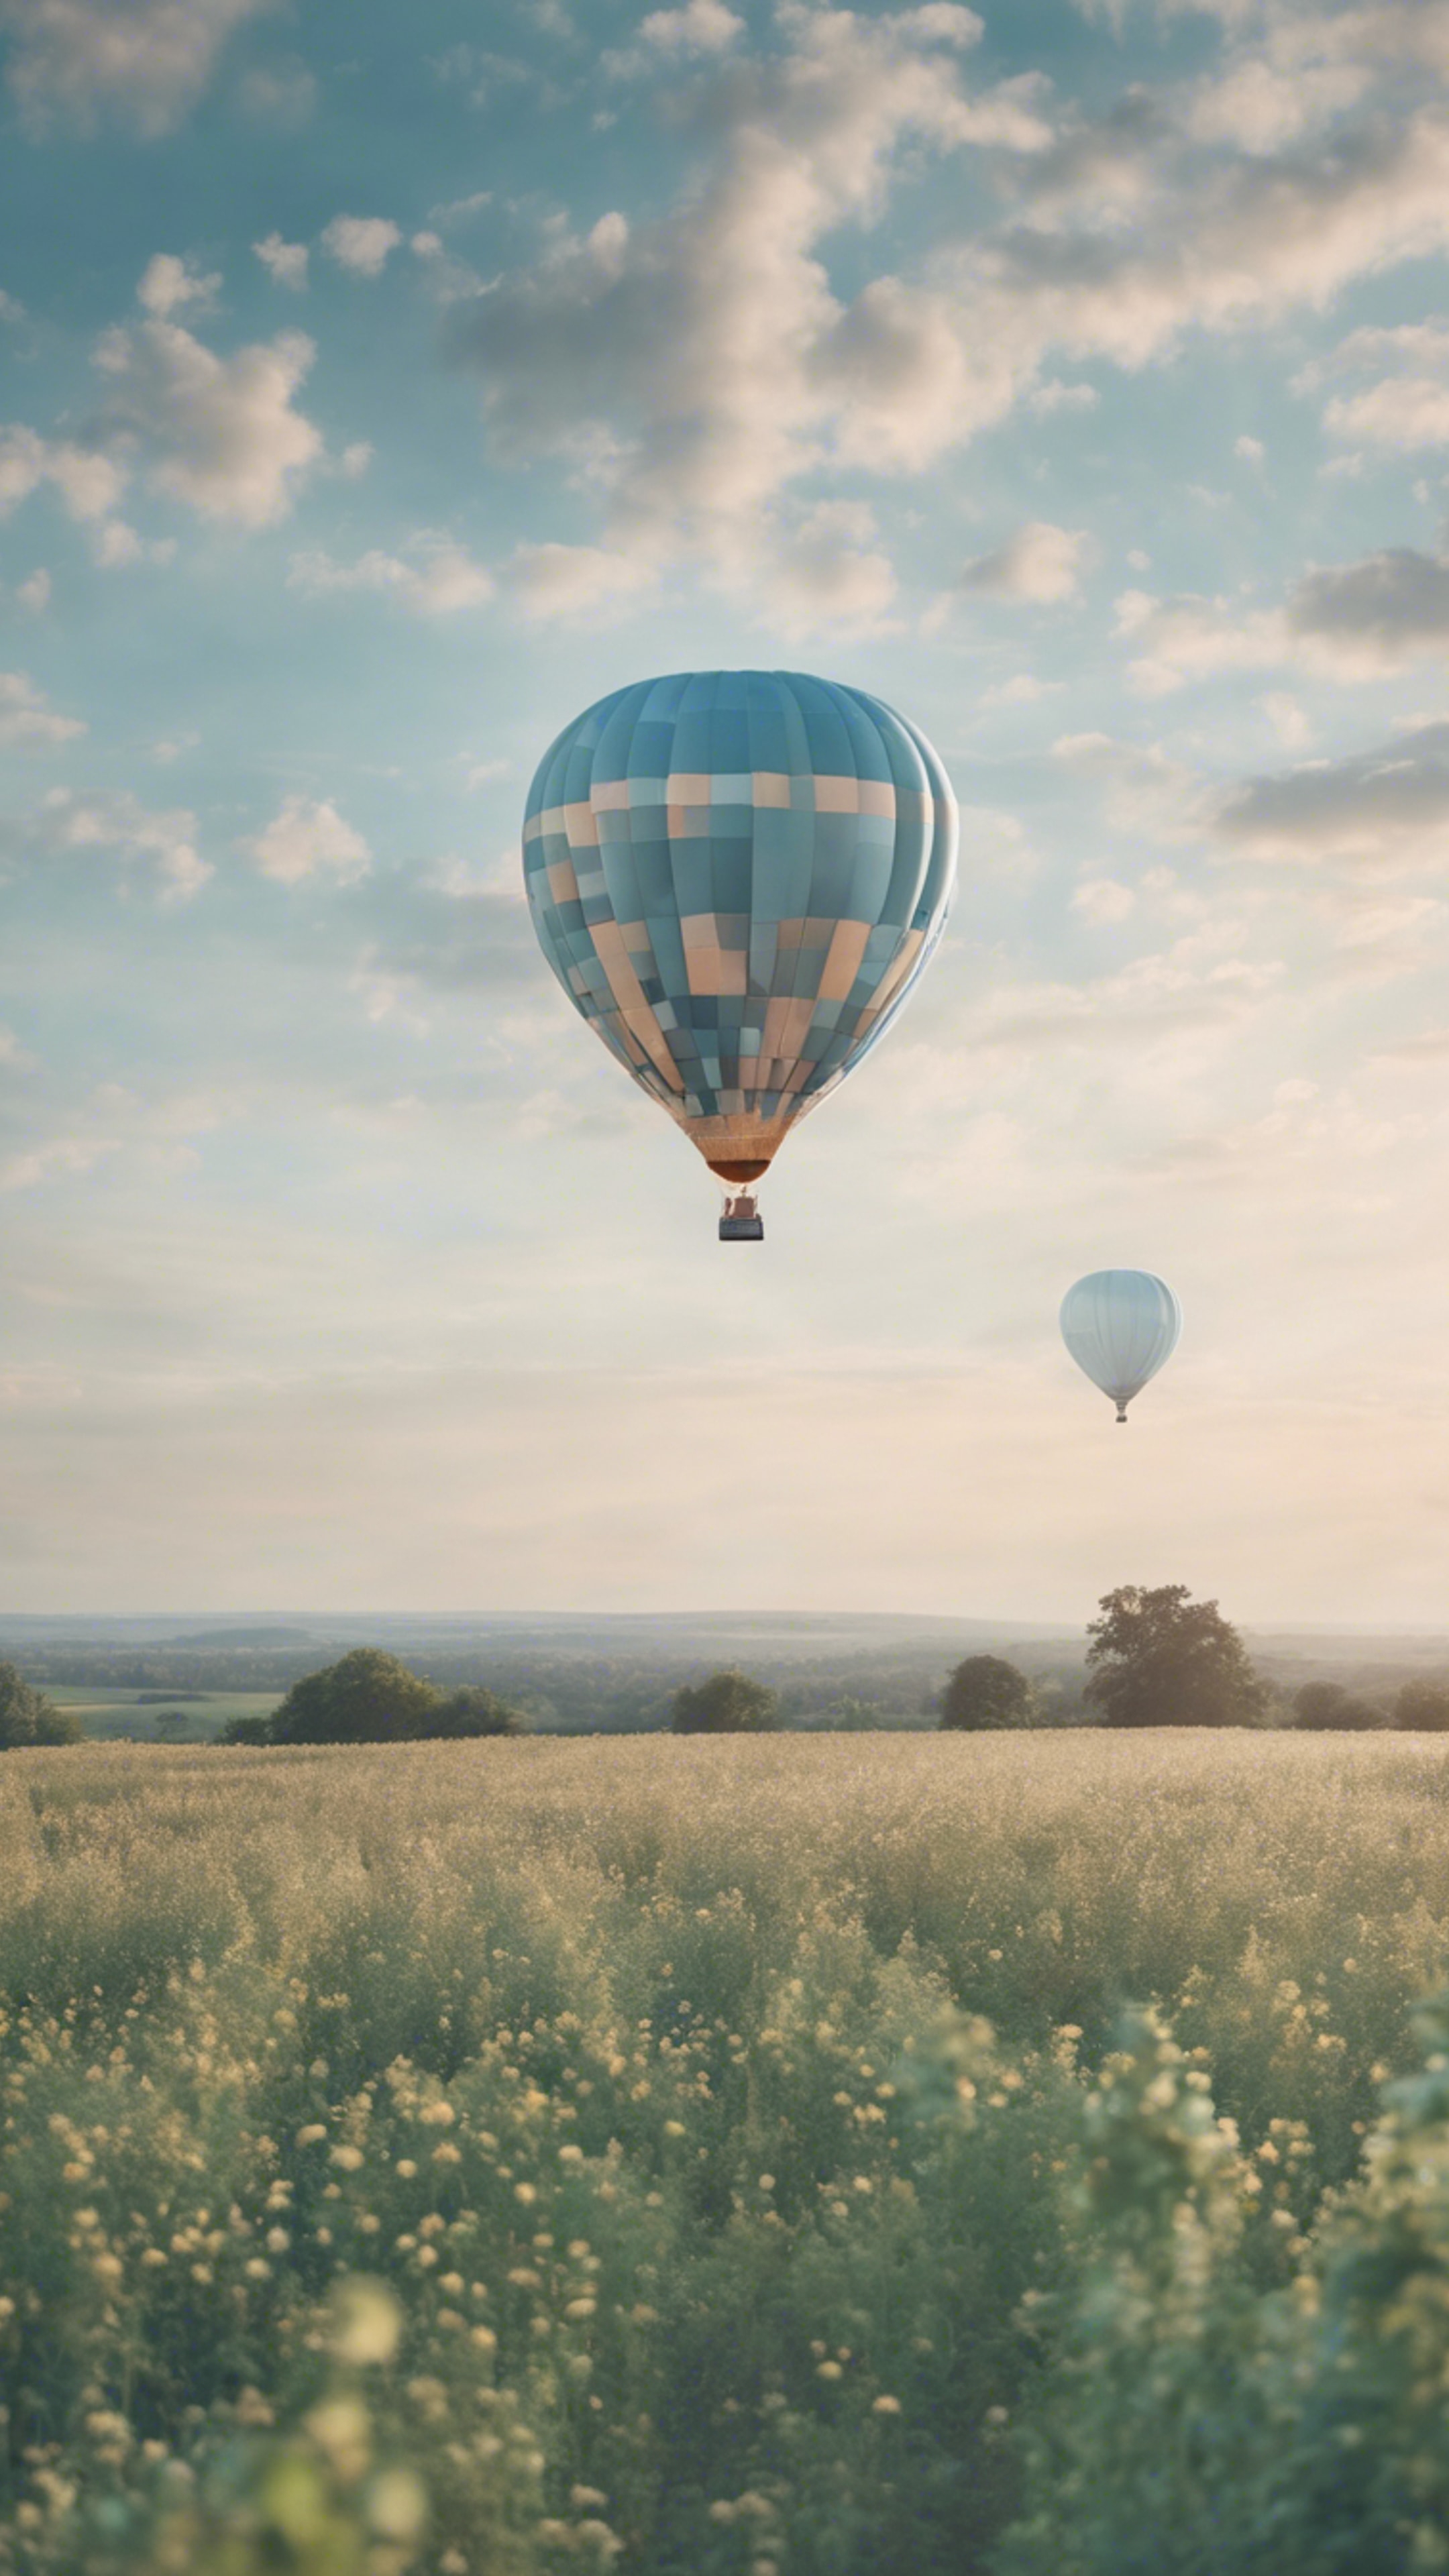 A pastel blue hot air balloon floating serenely above a patchwork field. Wallpaper[b19c340976c044f4b3c6]